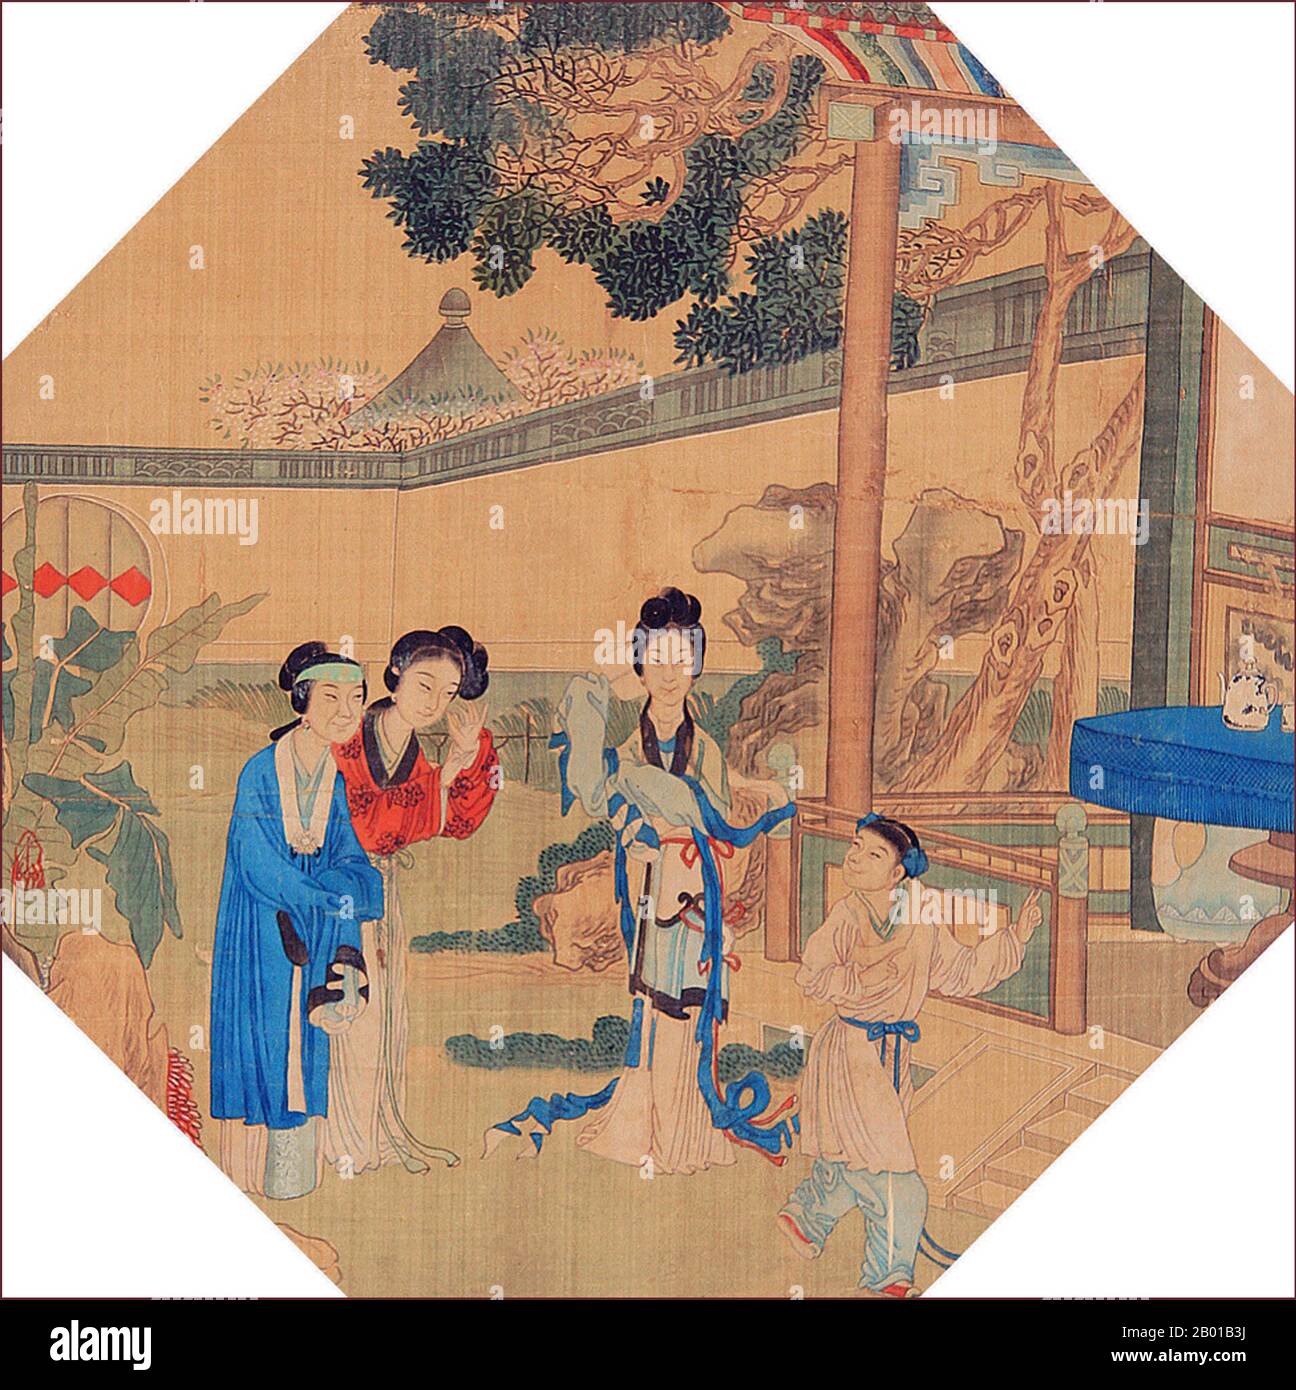 China: Lady Xing, You Erjie ('Second Sister You'), You Sanjie ('Third Sister You') and a child in the garden. Qing Dynasty painting of a scene from the Dream of the Red Chamber, mid-18th century.  Dream of the Red Chamber (pinyin: Hóng Lóu Mèng; Wade–Giles: Hung Lou Meng), composed by Cao Xueqin (4 April 1710 - 10 June 1765), is one of China's Four Great Classical Novels. It was composed sometime in the middle of the 18th century during the Qing Dynasty. It is a masterpiece of Chinese vernacular literature and is generally acknowledged to be the pinnacle of classical Chinese novels. Stock Photo